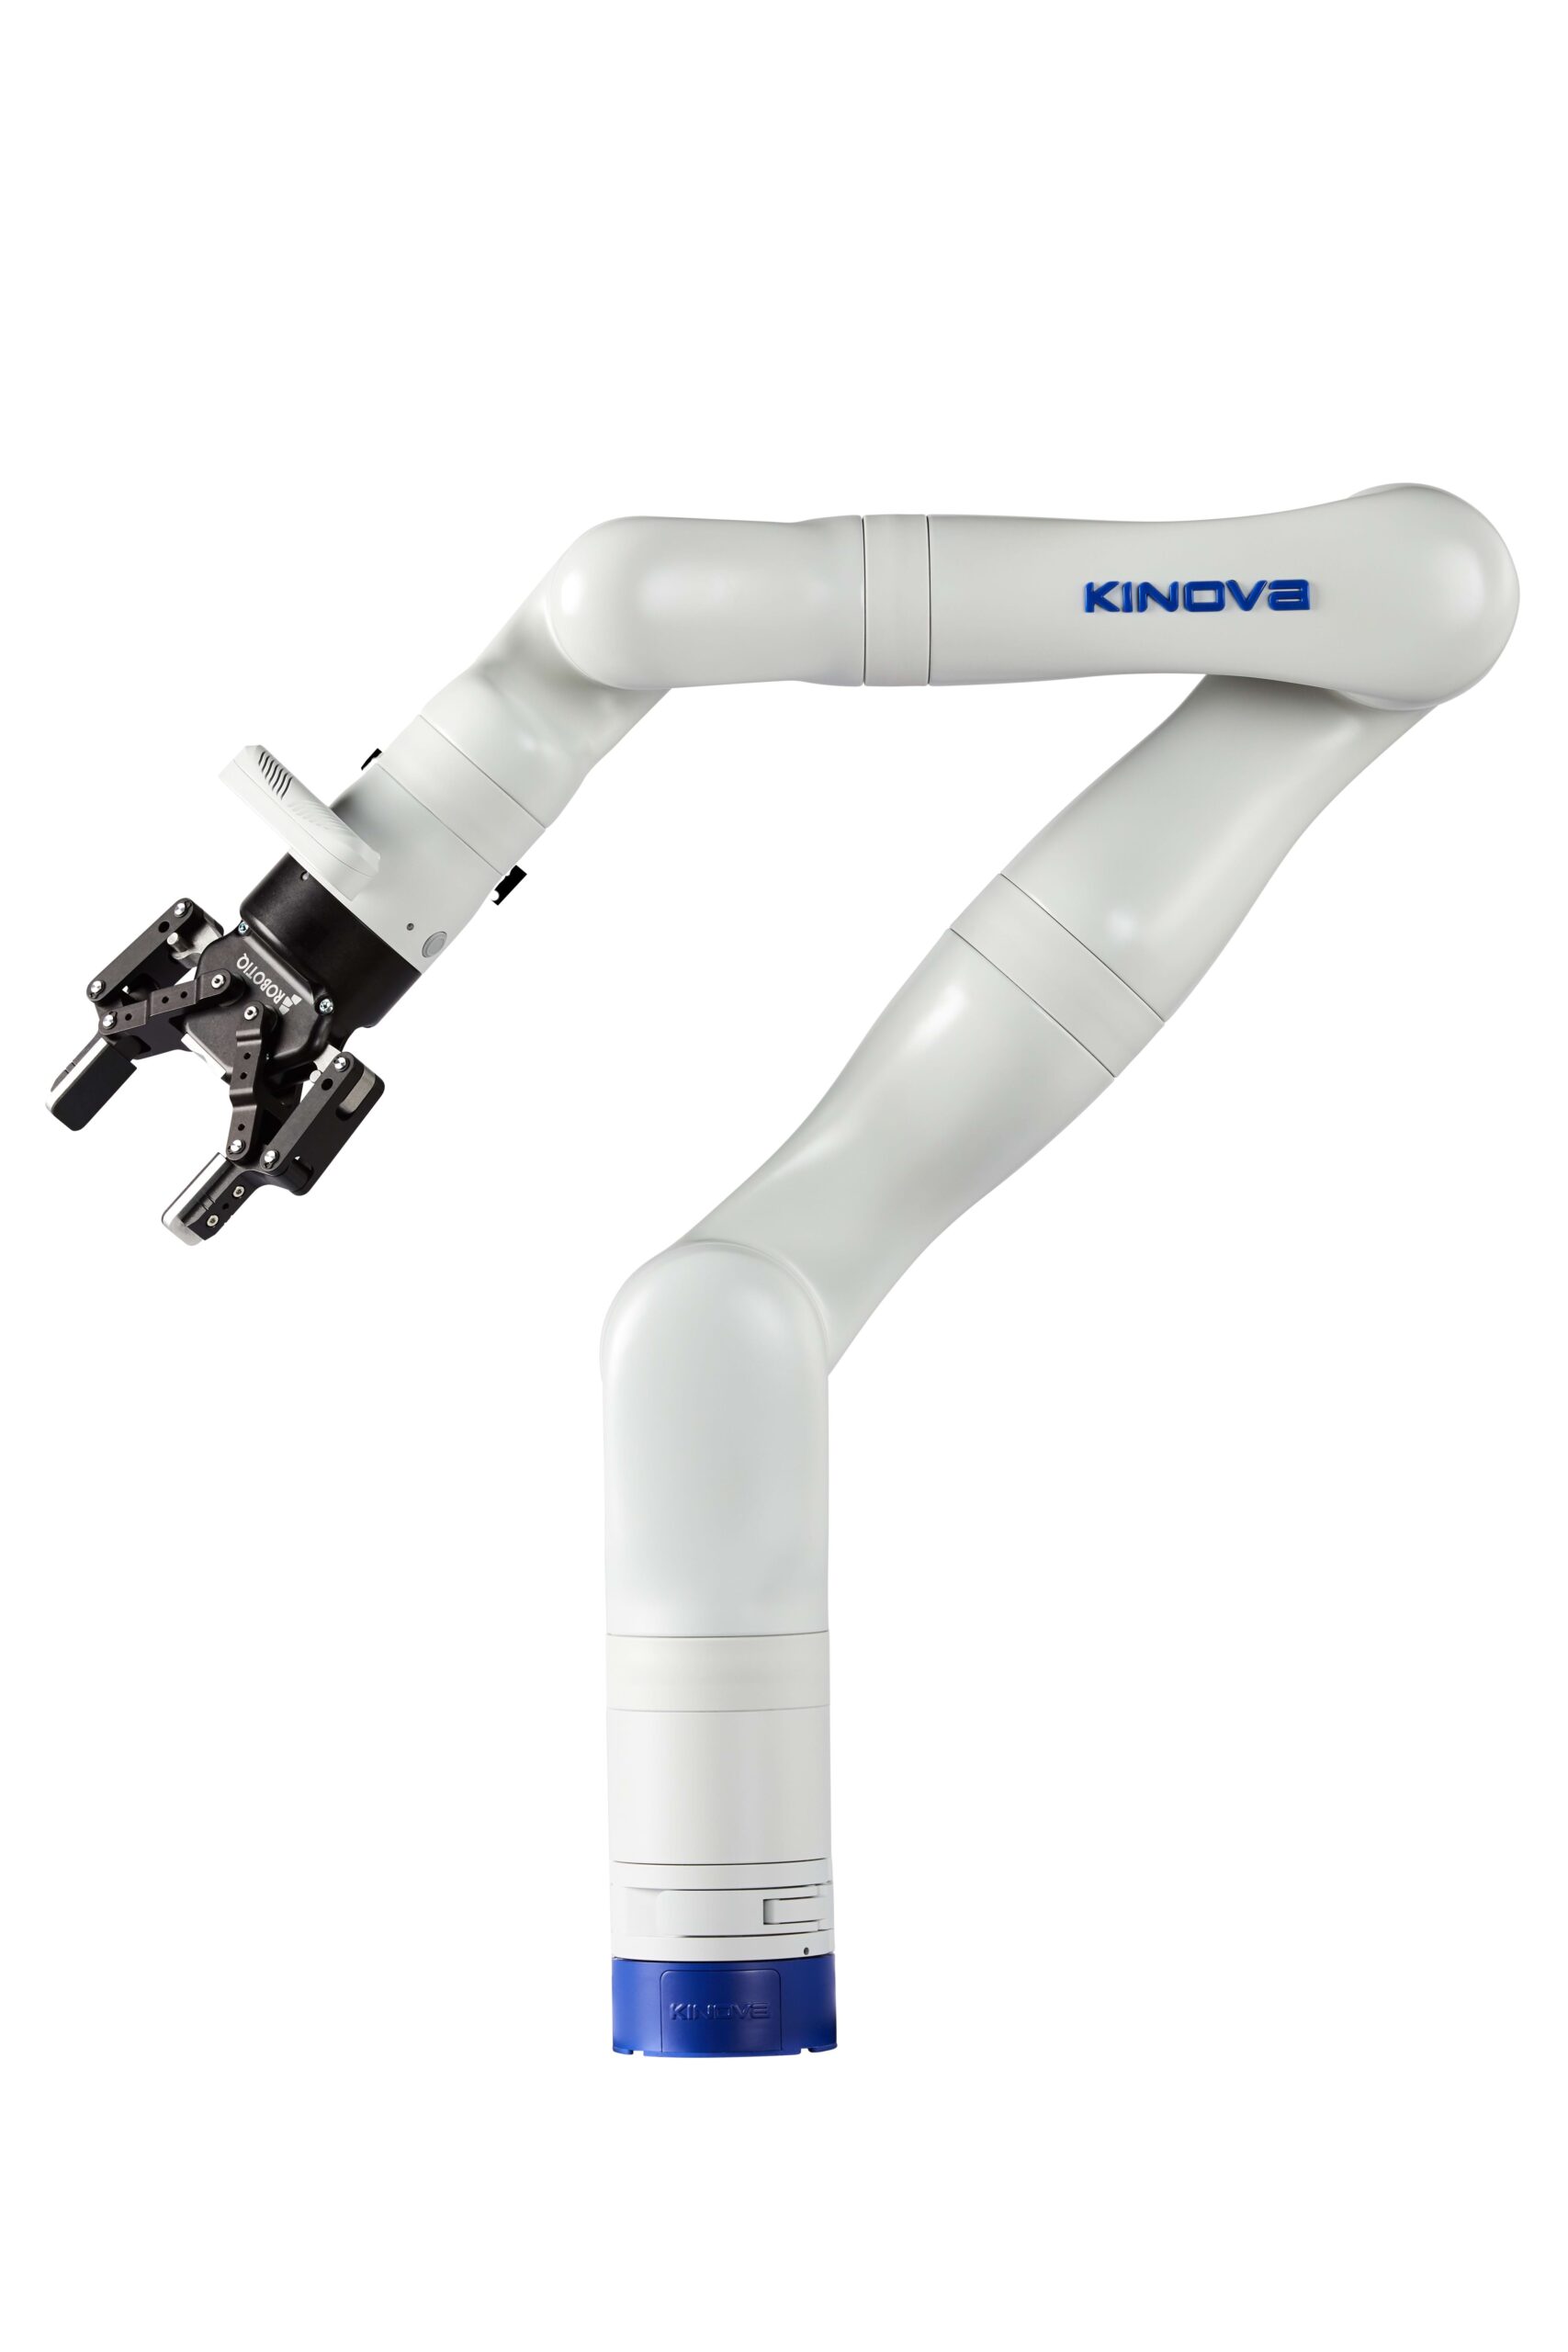 White robotic arm with black gripper. On the side of the robot it says Kinova.